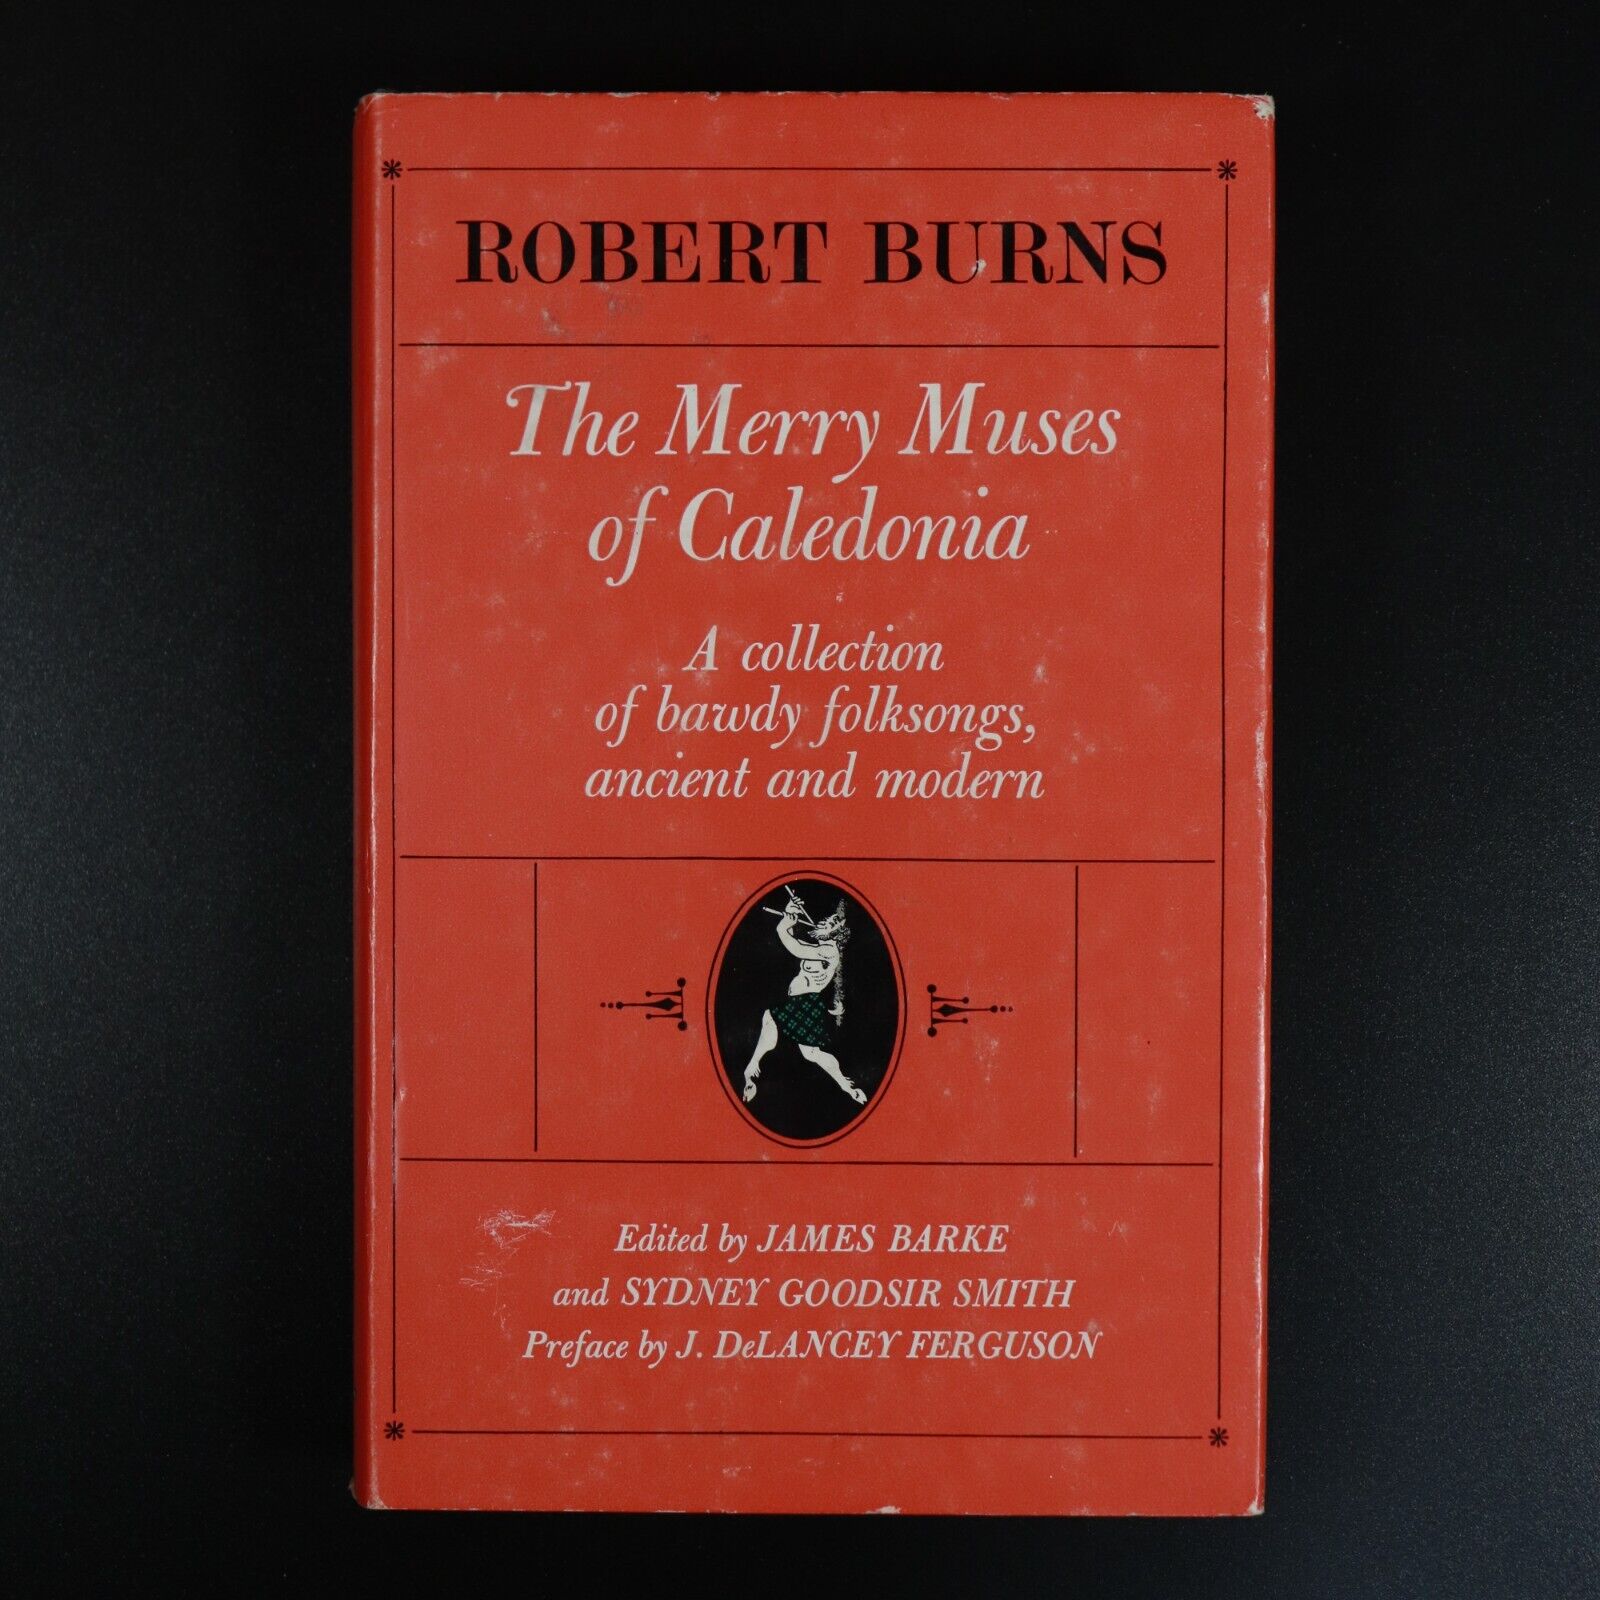 1965 The Merry Muses Of Caledonia by Robert Burns Scottish Literature Book